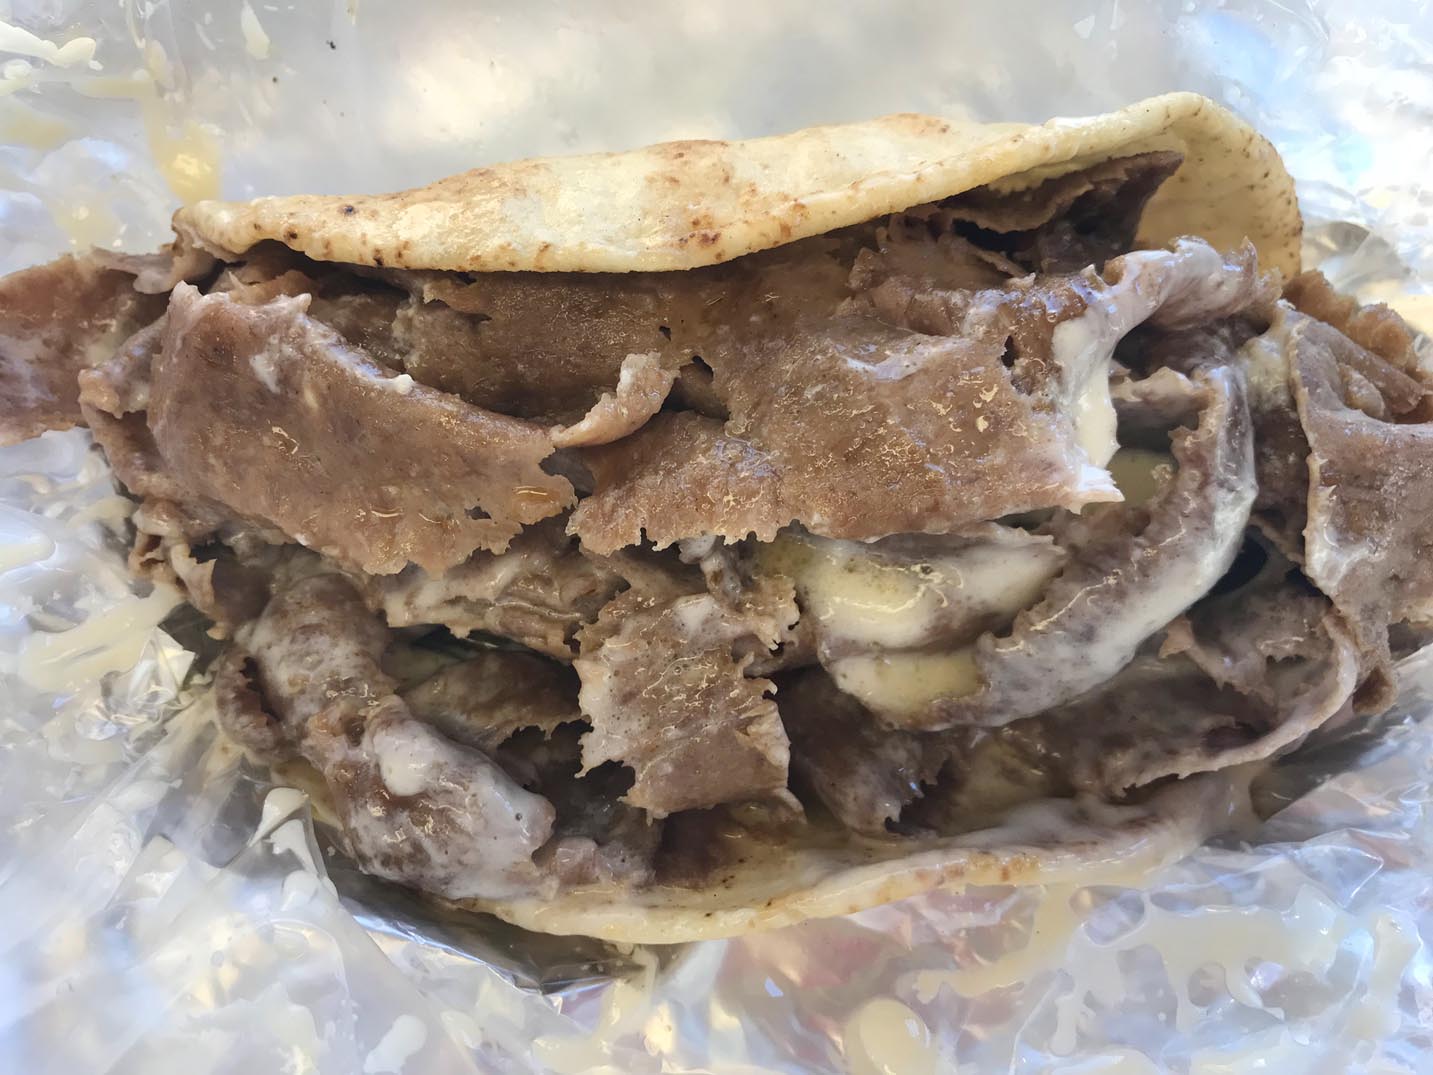 A classic donair in pita bread with white sauce from Tony's in Halifax, Nova Scotia